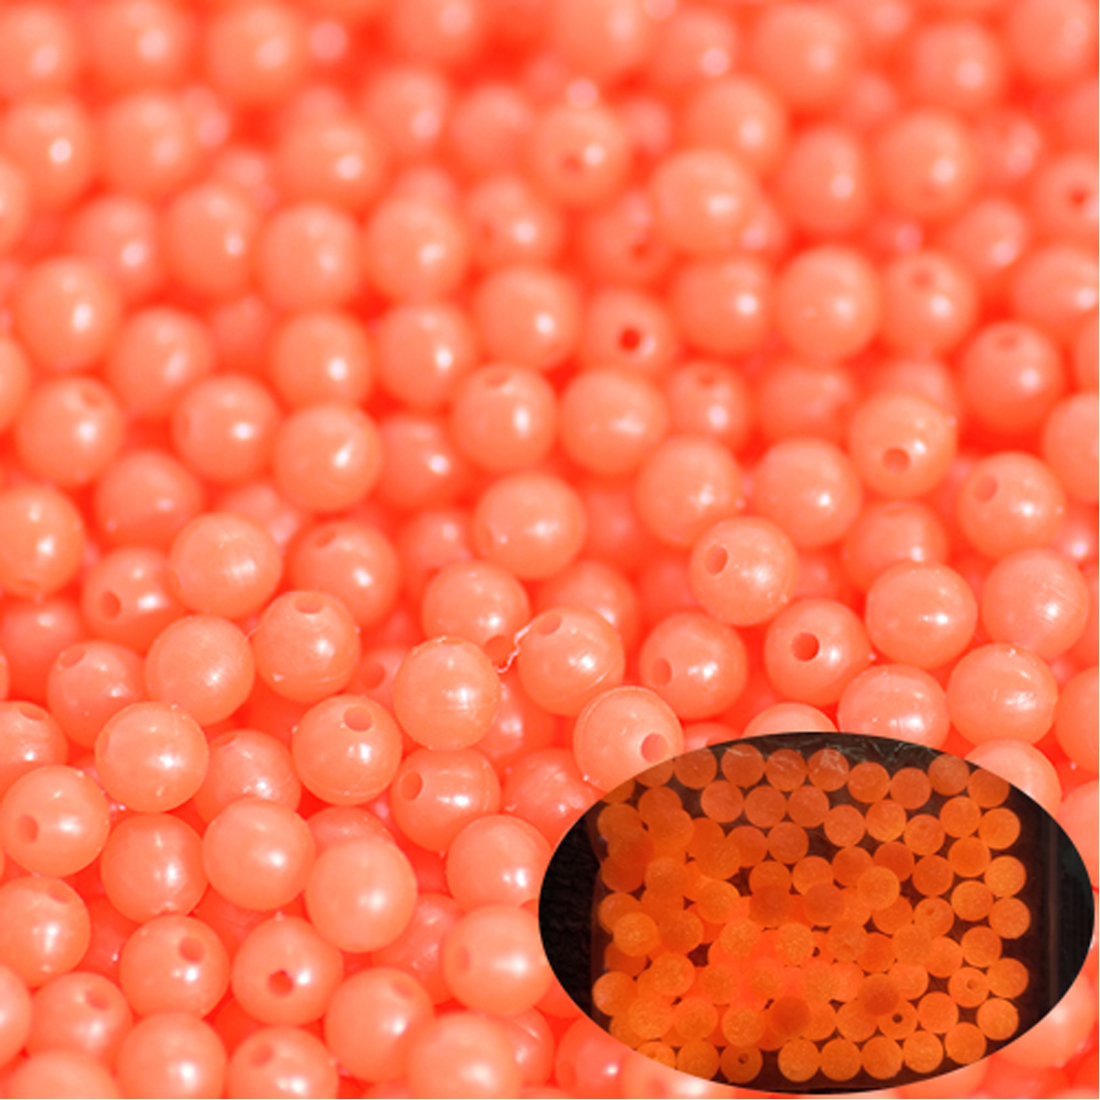 100pcs/lot Fishing Beads Stopper 4mm 5mm 6mm 8mm 10mm Luminous Round  Fishing Space Beans Stops Soft Rubber Rig Lure Accessories